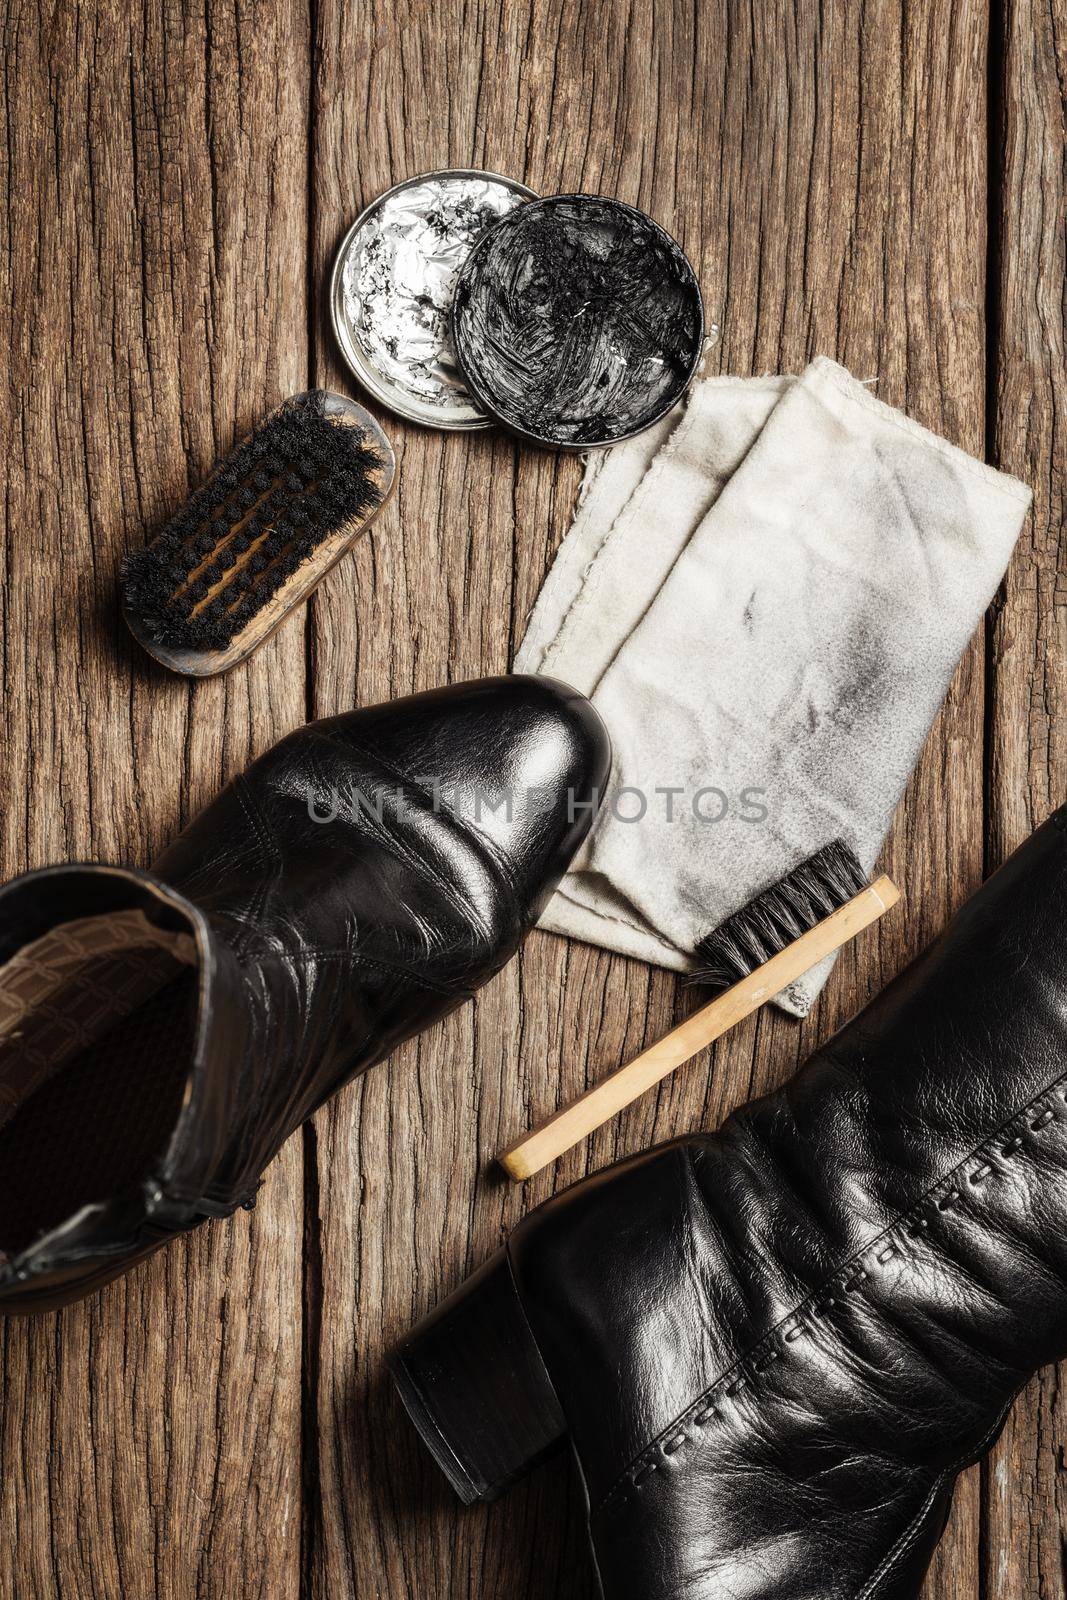 cleaning and polishing the leather shoes by norgal